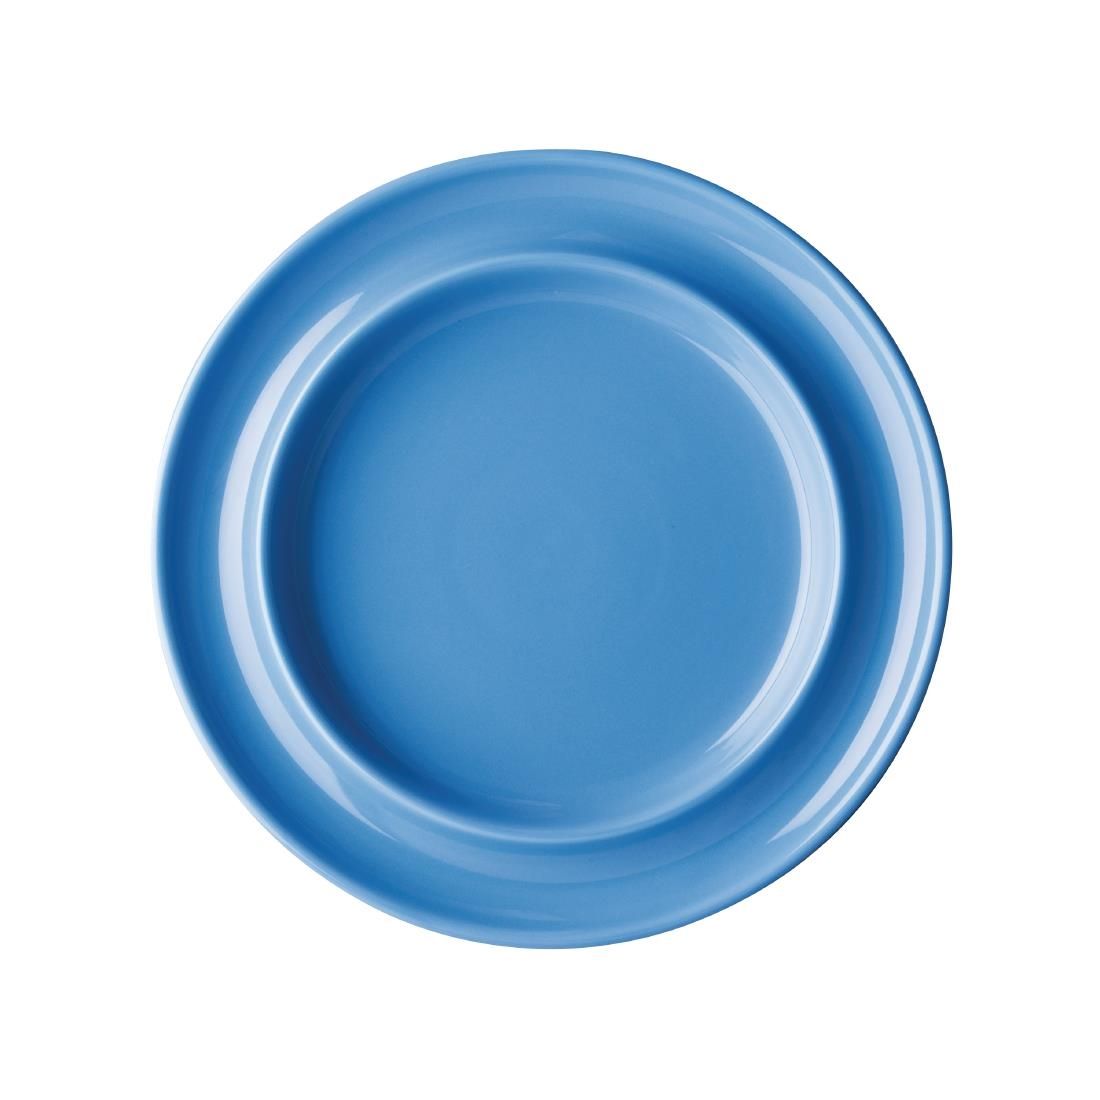 DW140 Olympia Heritage Raised Rim Plates Blue 203mm (Pack of 4)